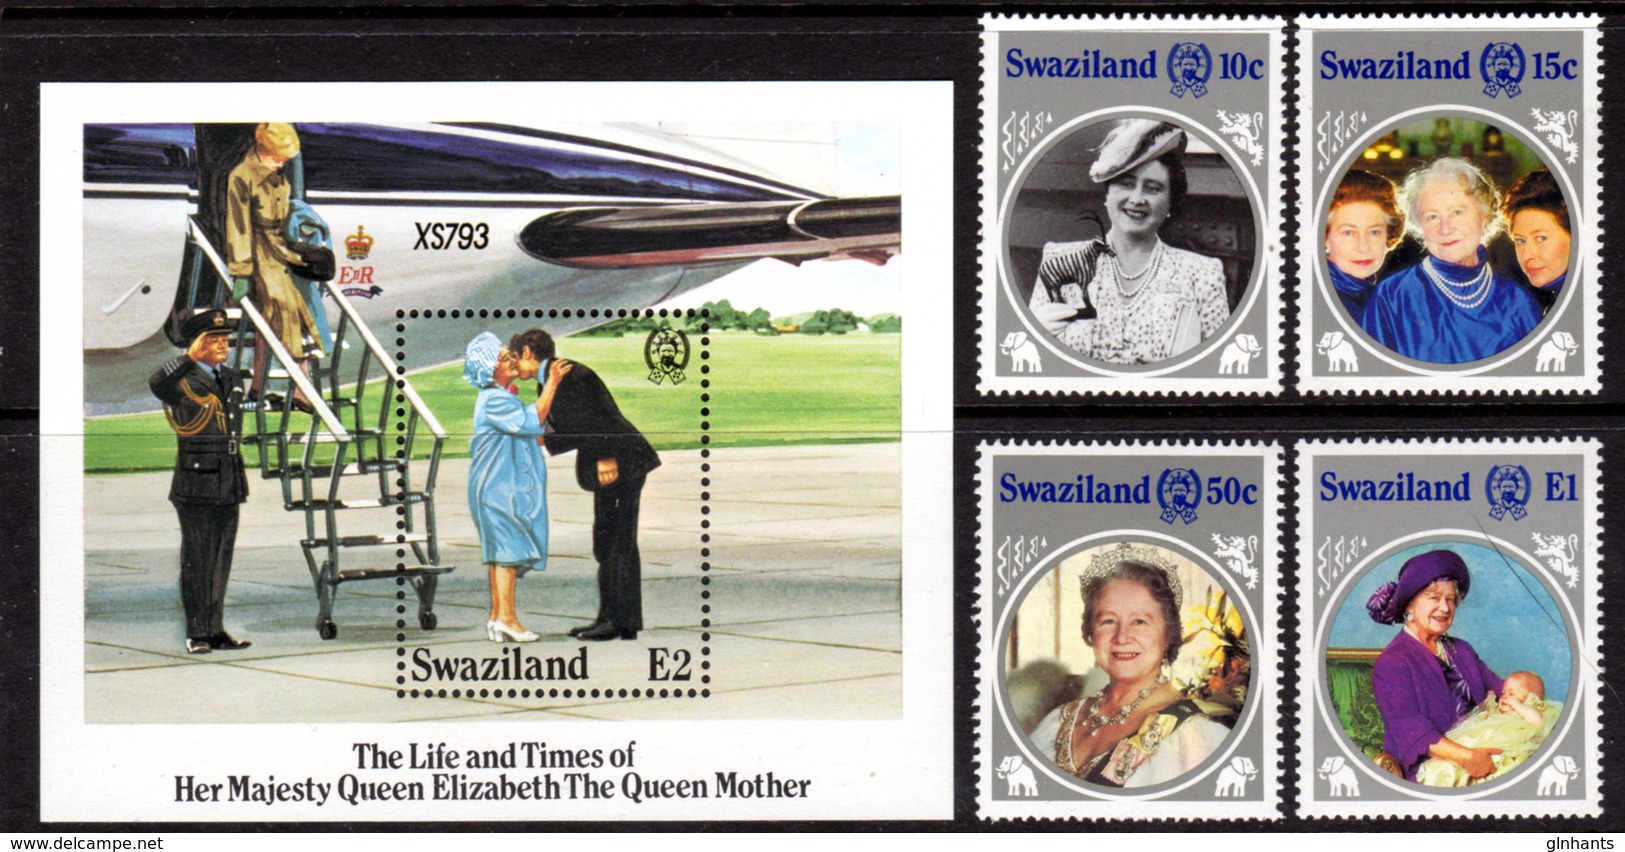 SWAZILAND - 1985 LIFE & TIMES OF QUEEN ELIZABETH THE QUEEN MOTHER SET (4V) & MS FINE MNH ** SG 486-489, MS490 - Swaziland (1968-...)